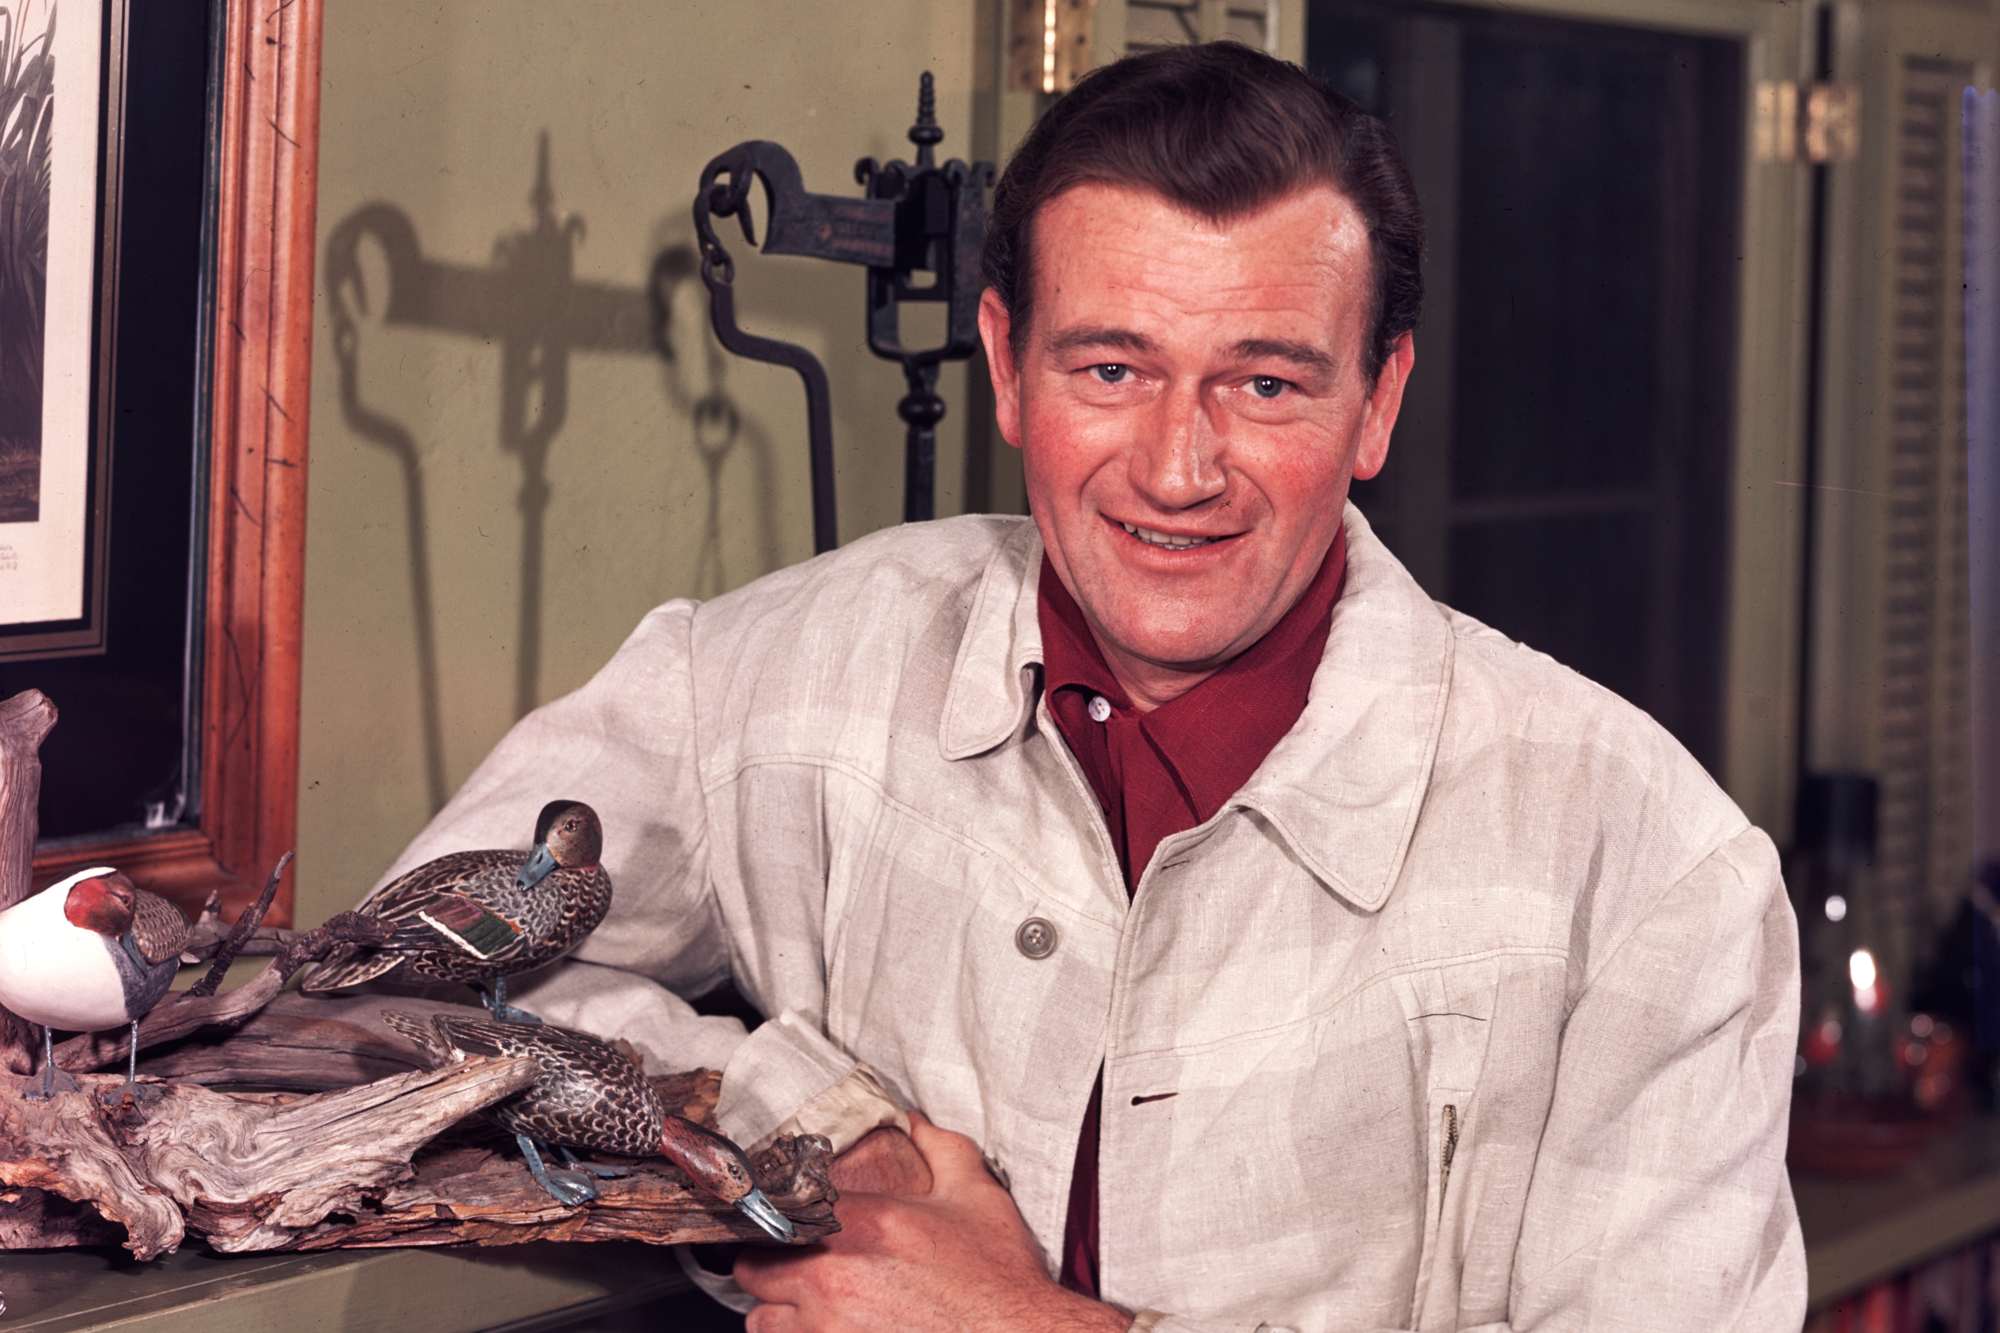 Life portrait of John Wayne leaning against a mantel next to a wooden duck statue.